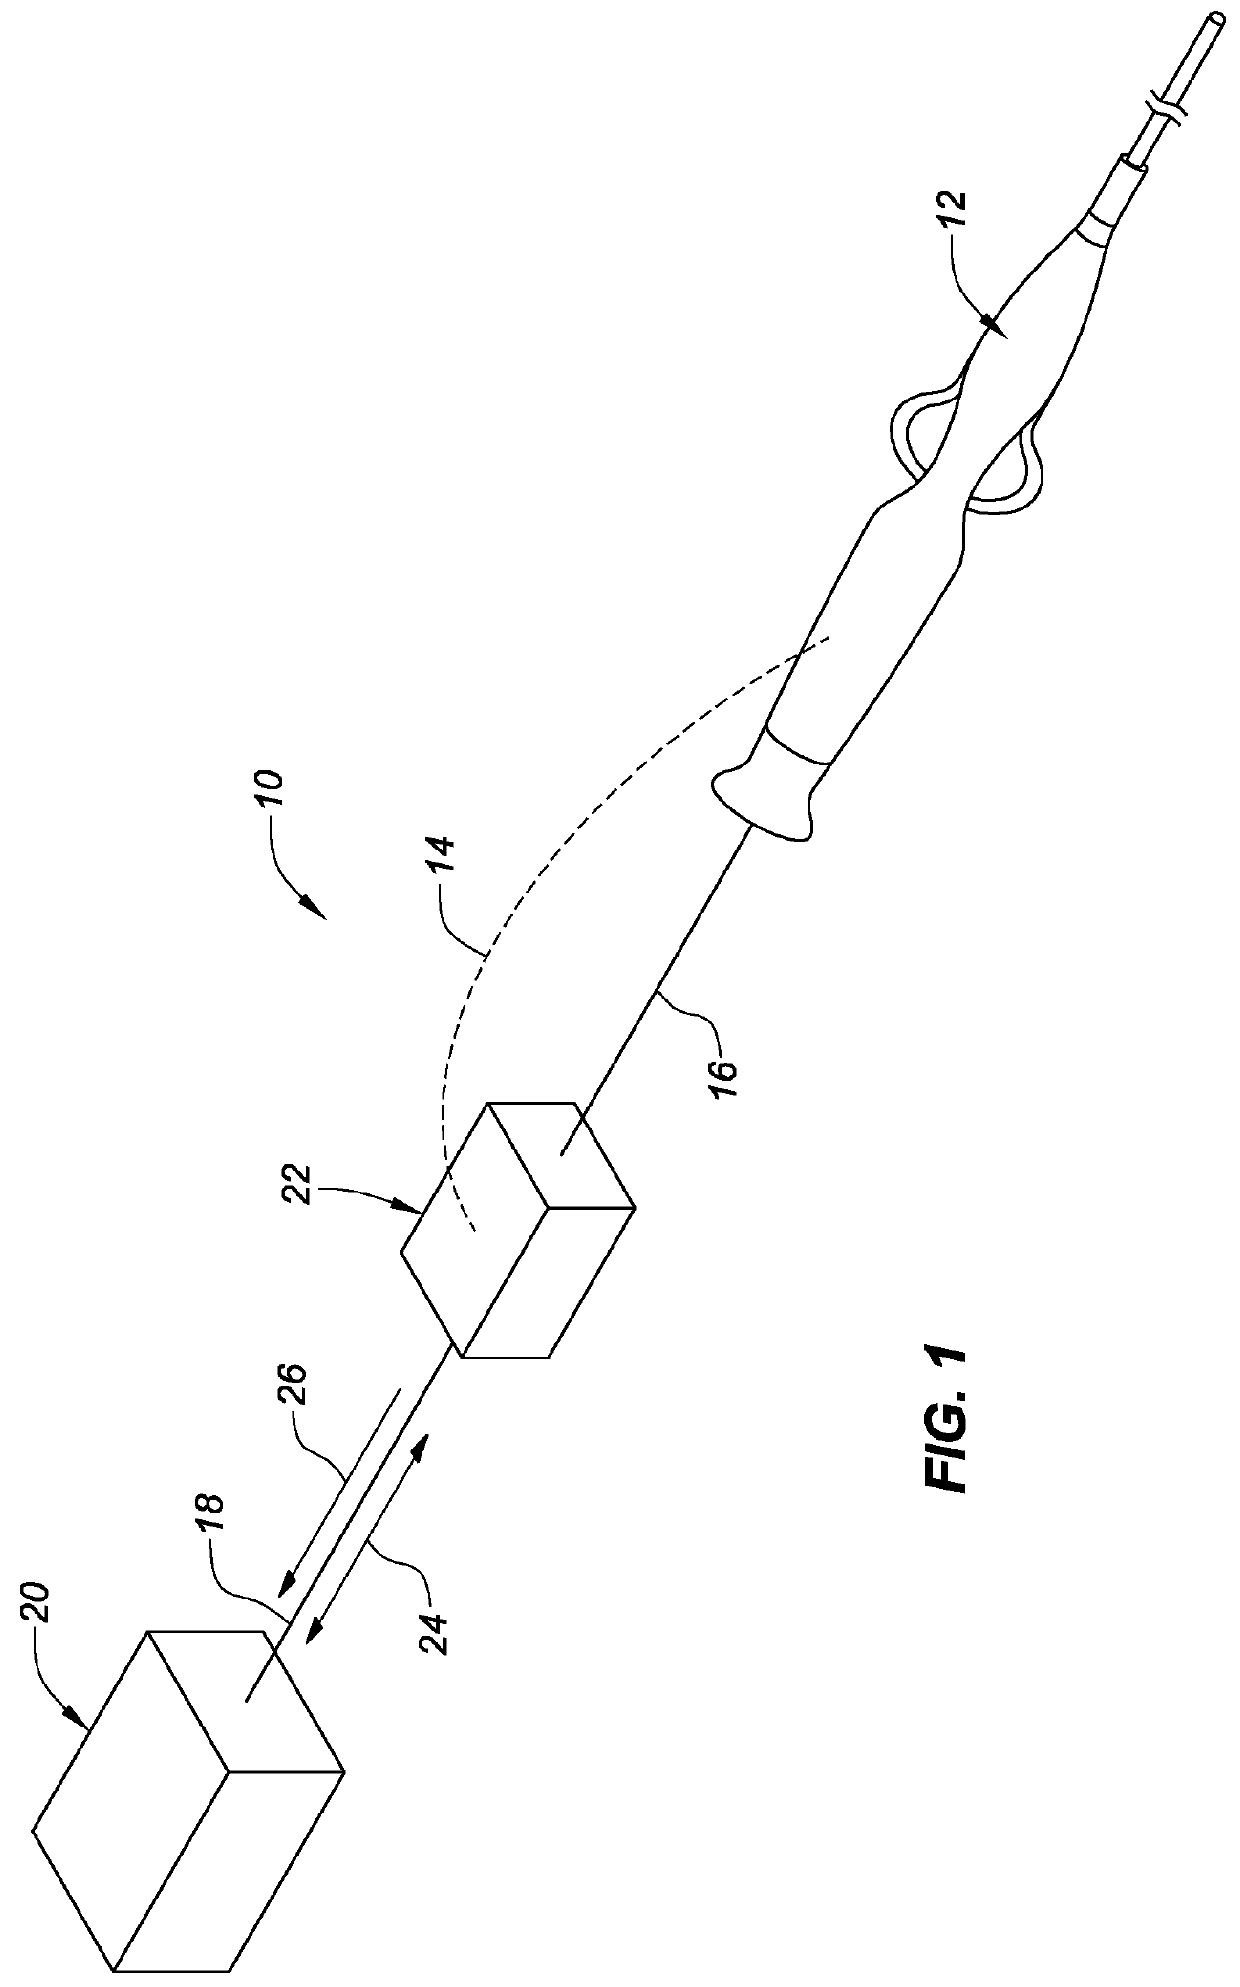 Ablation catheter tip with flexible electronic circuitry